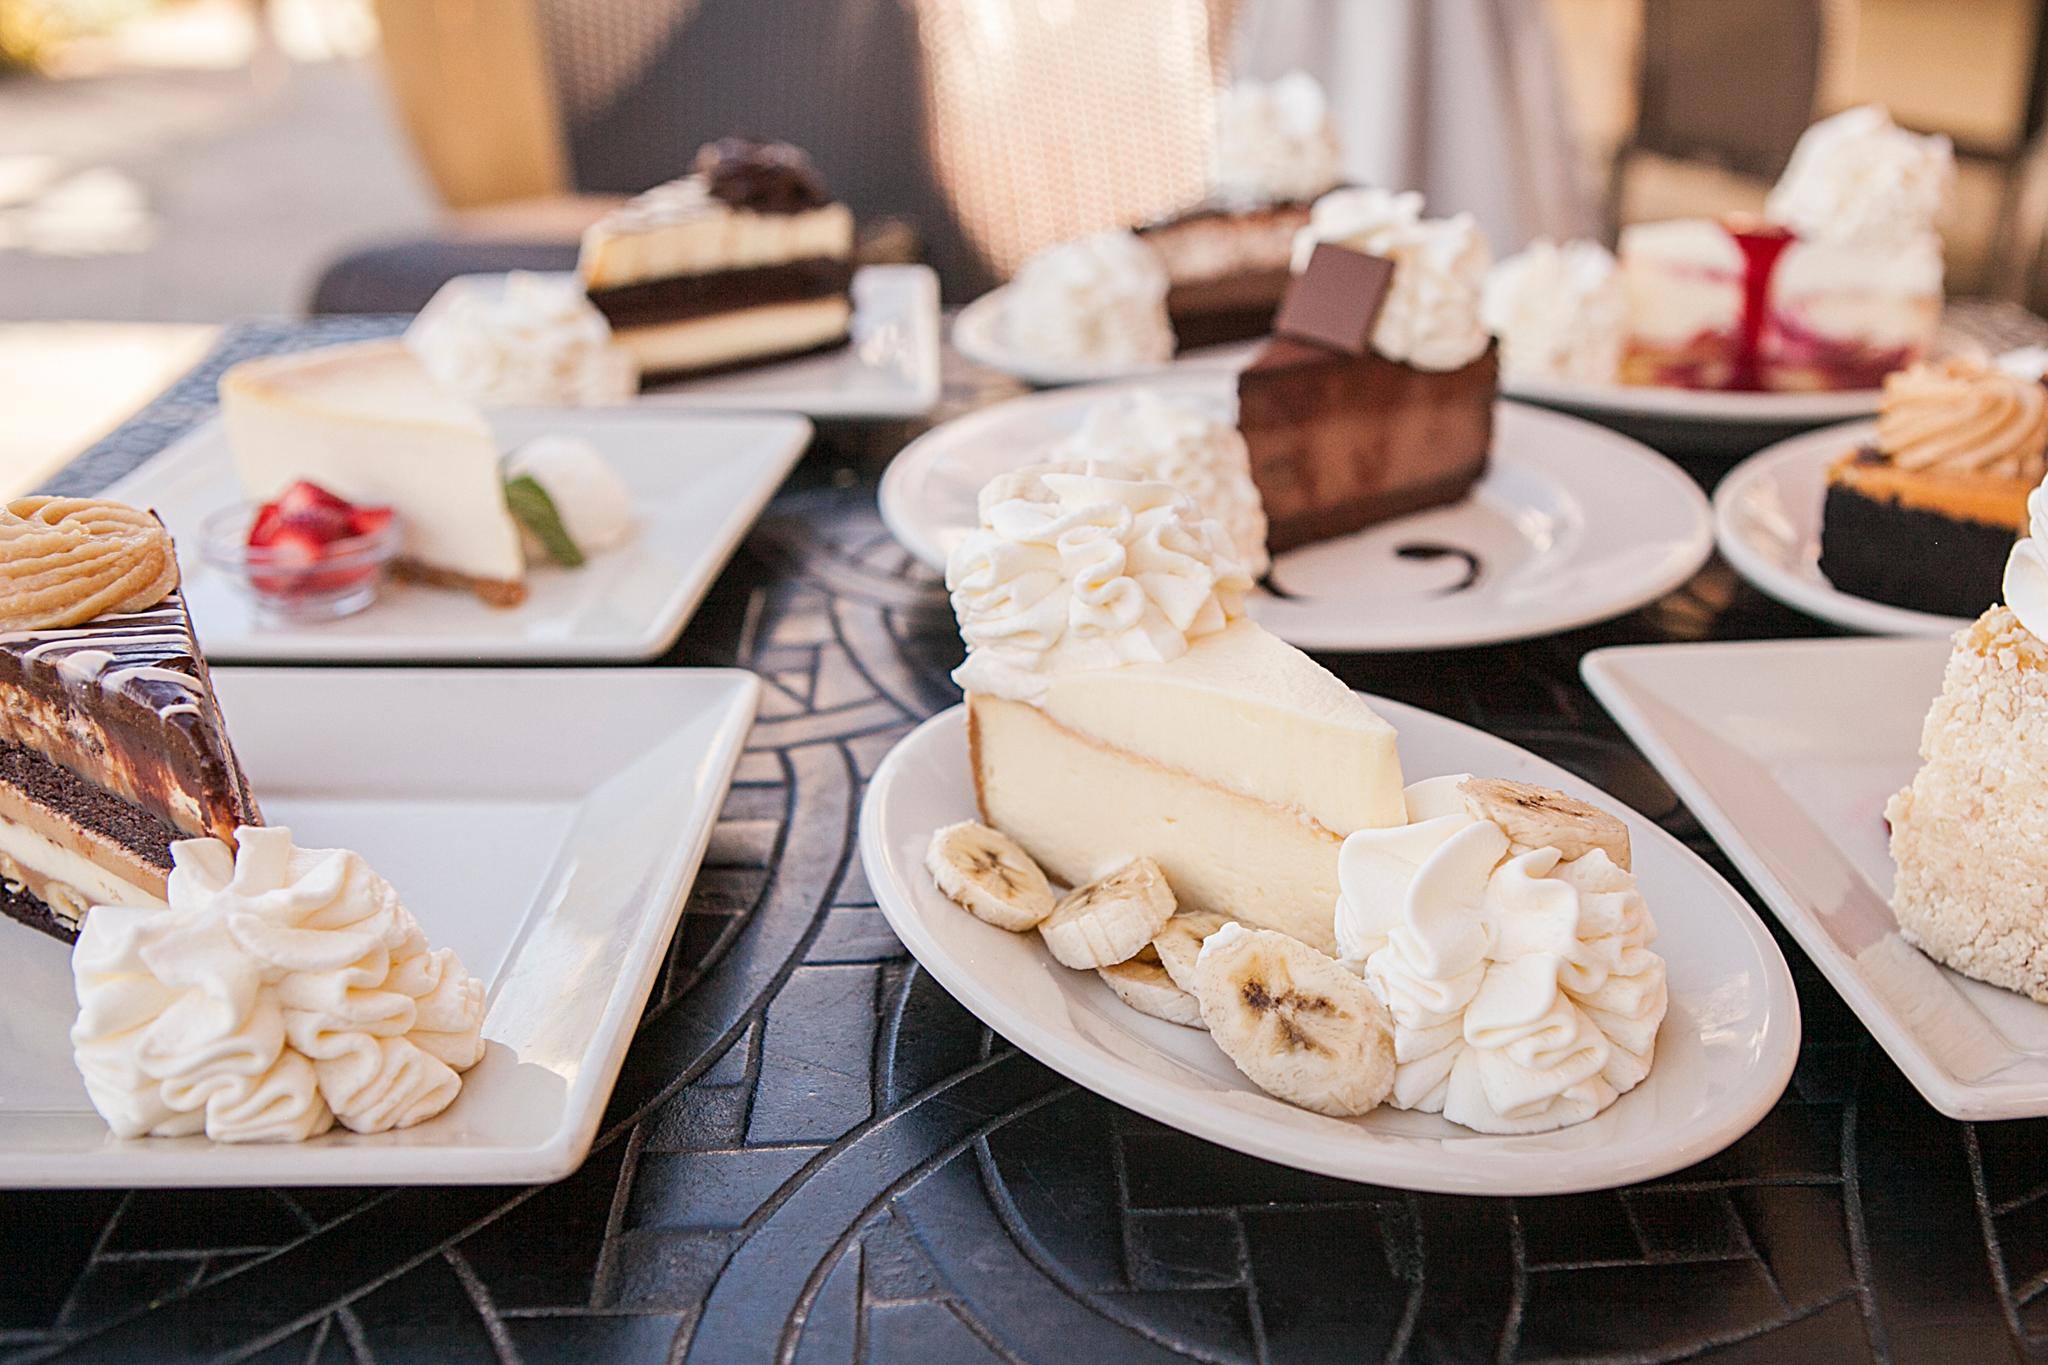 National Cheesecake Day: Get 1/2 price cheesecake at The Cheesecake Factory!